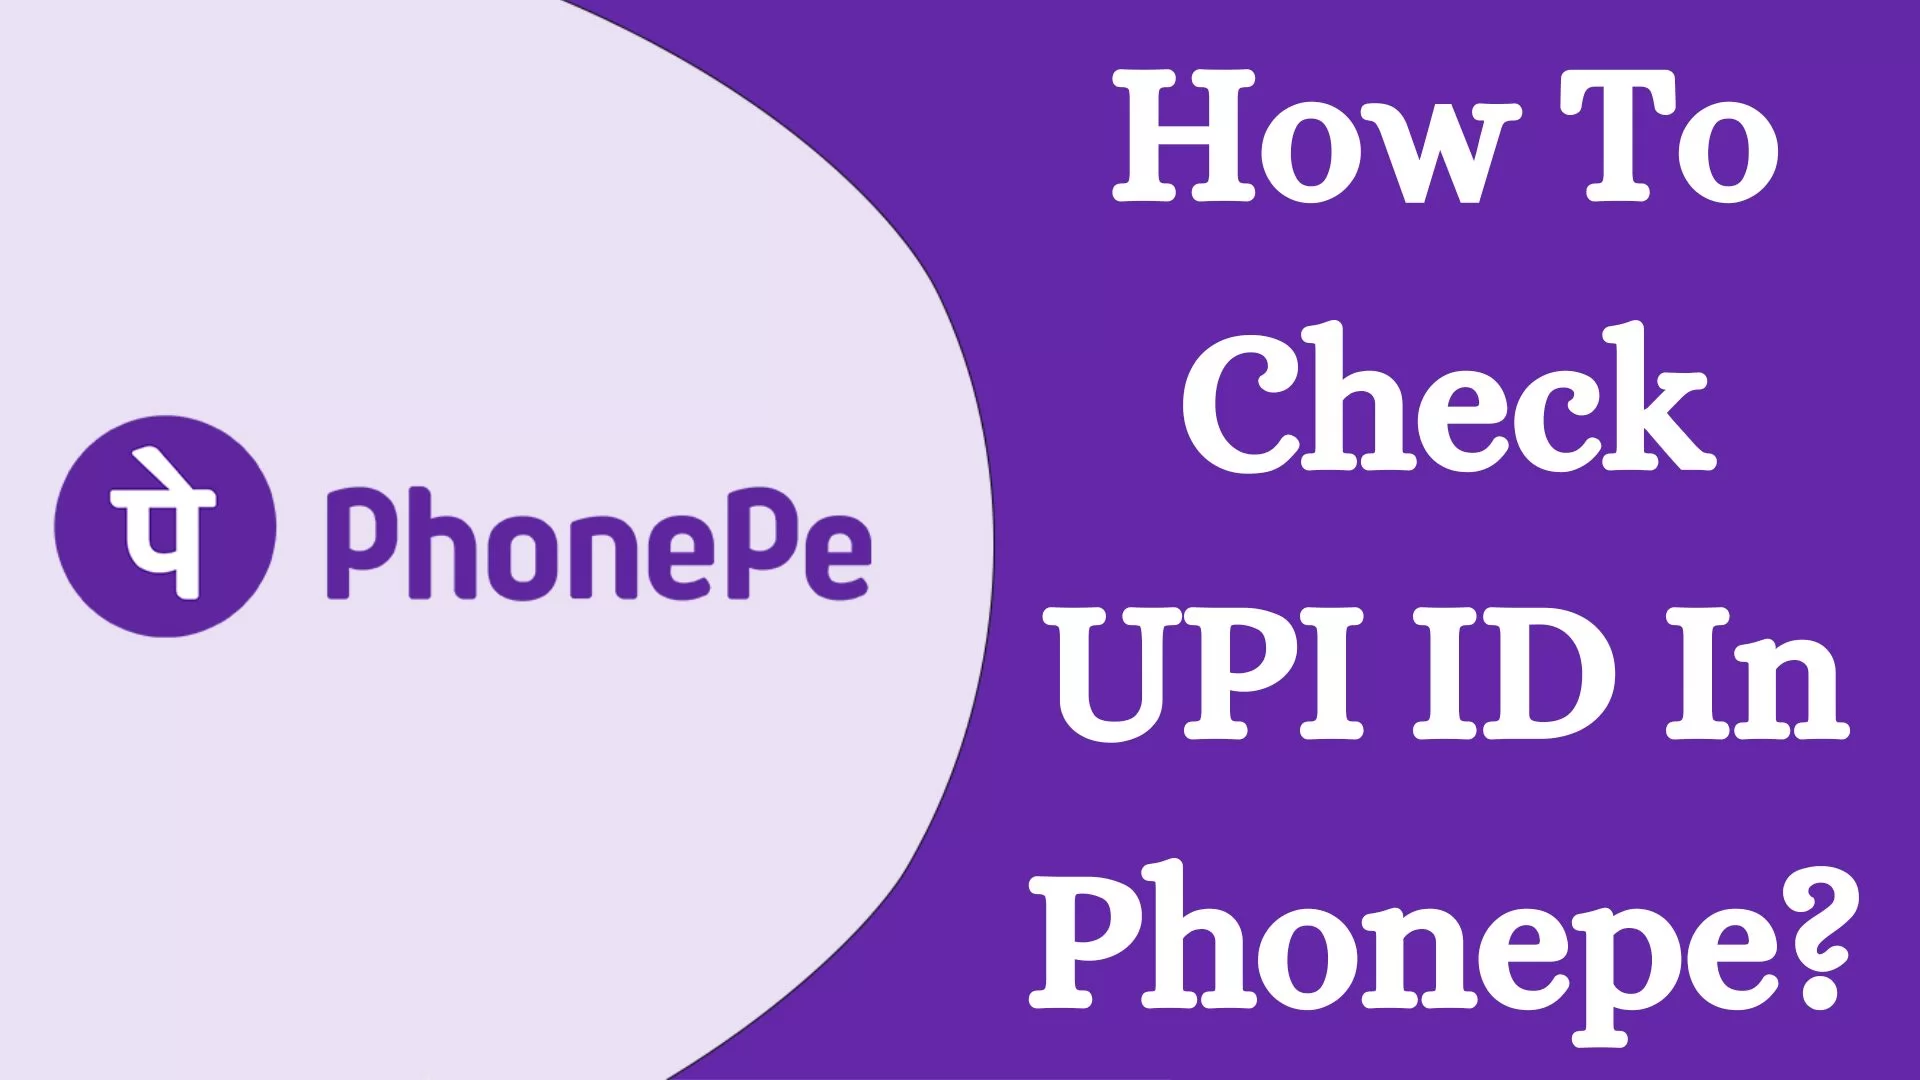 How To Check UPI ID In Phonepe